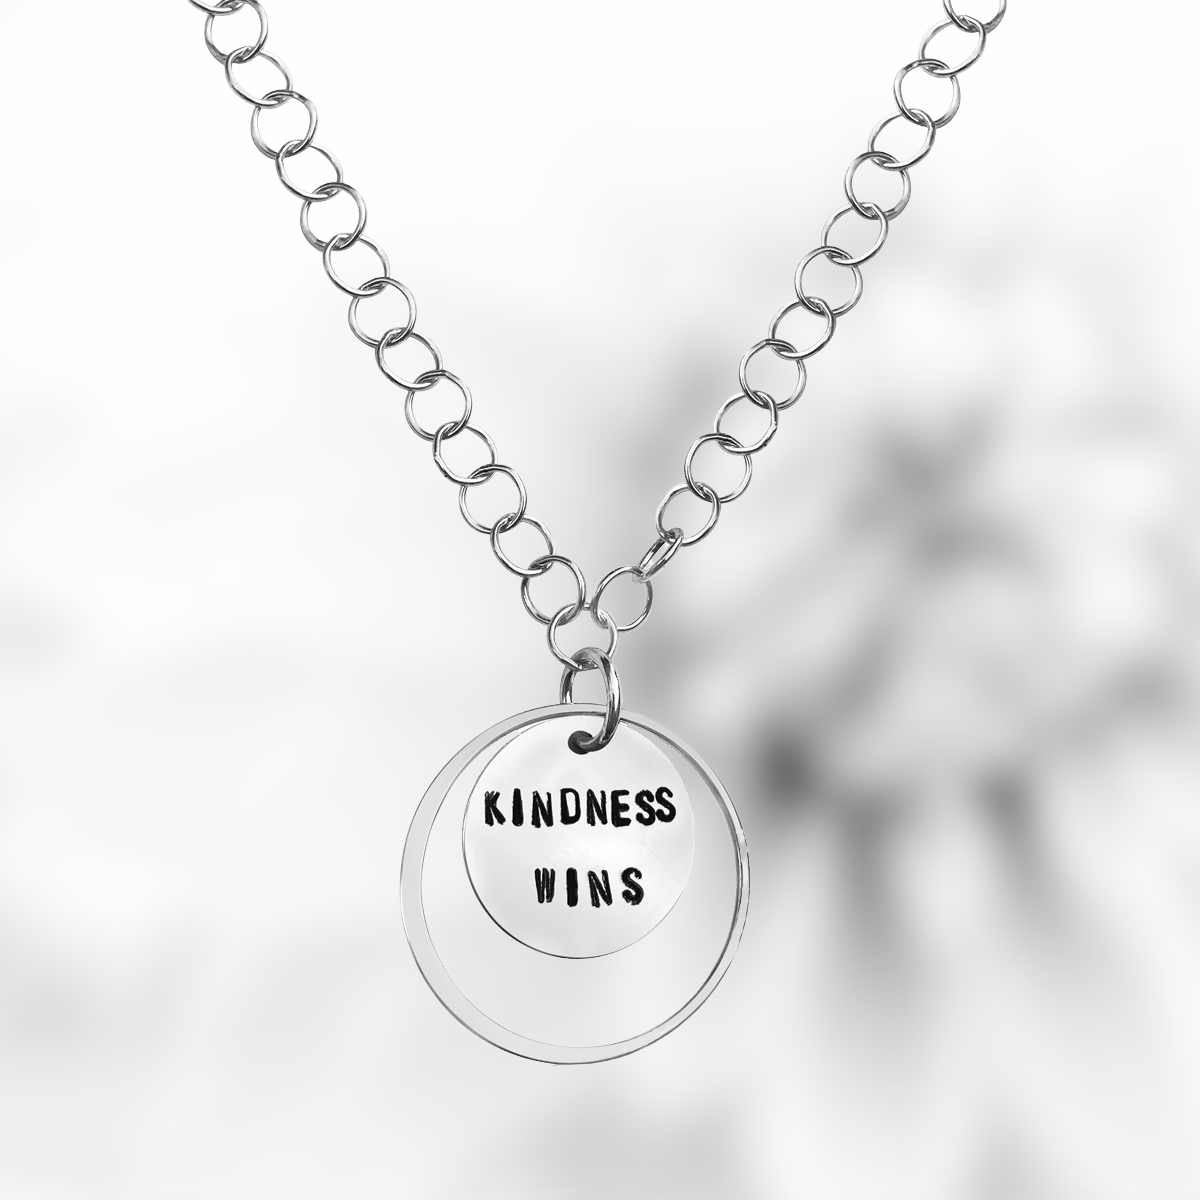 Kindness is a Strength Necklace, Sterling Silver Kindness Wins Jewelry